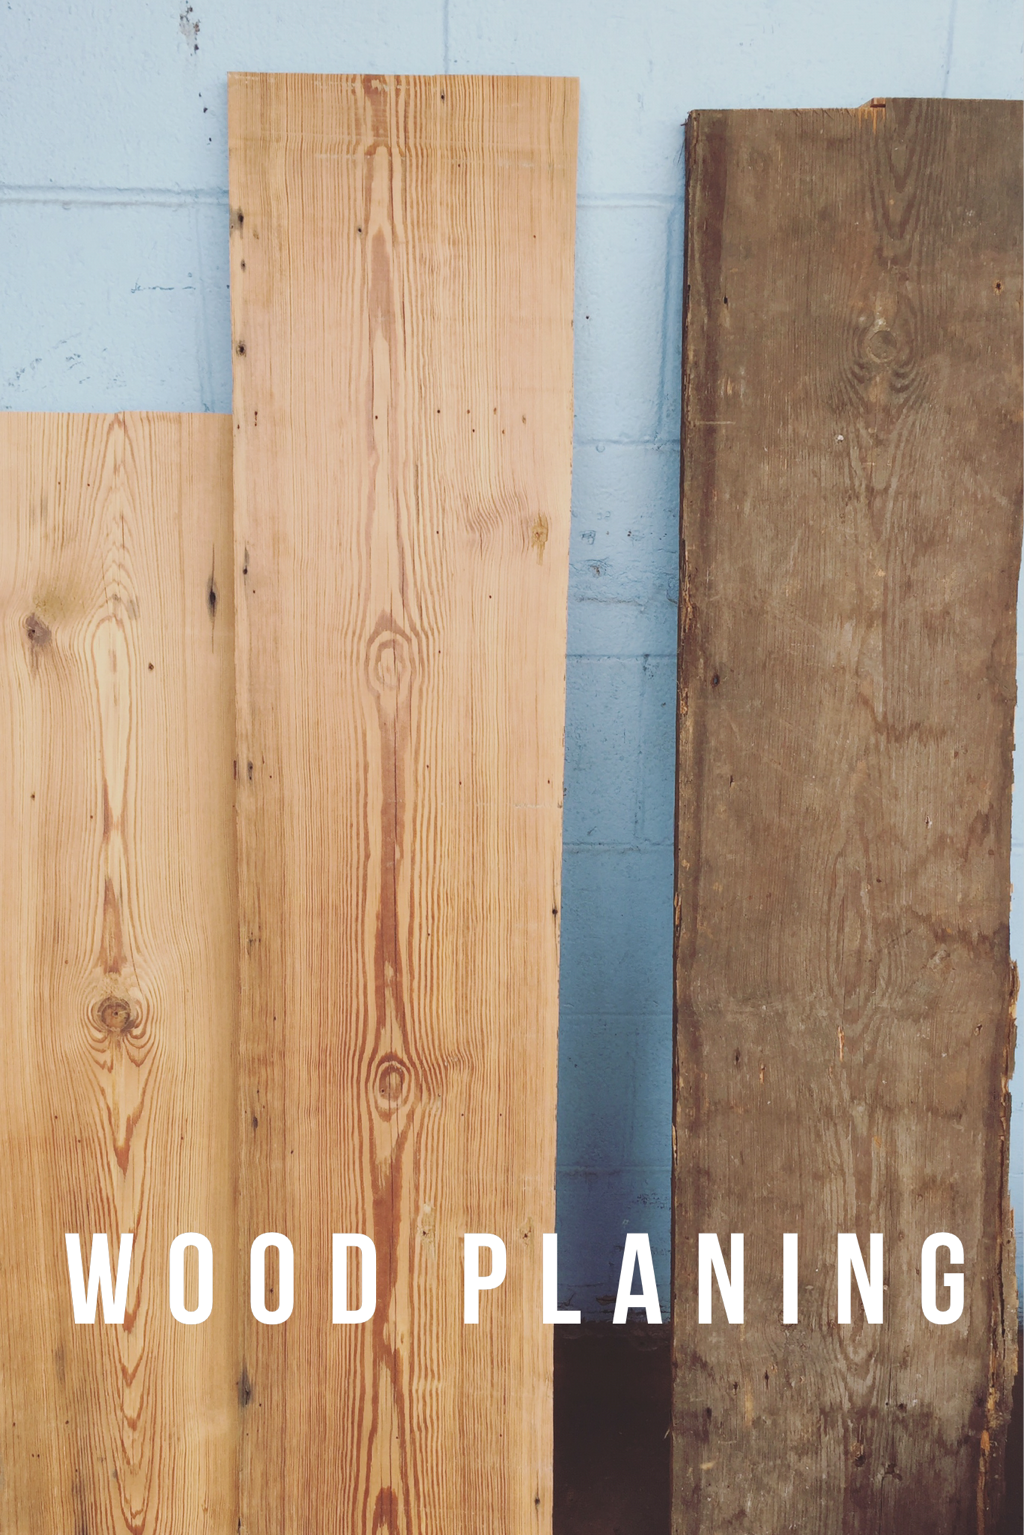 What is Wood Planing? Learn what it is, and how to do it from this blog post!